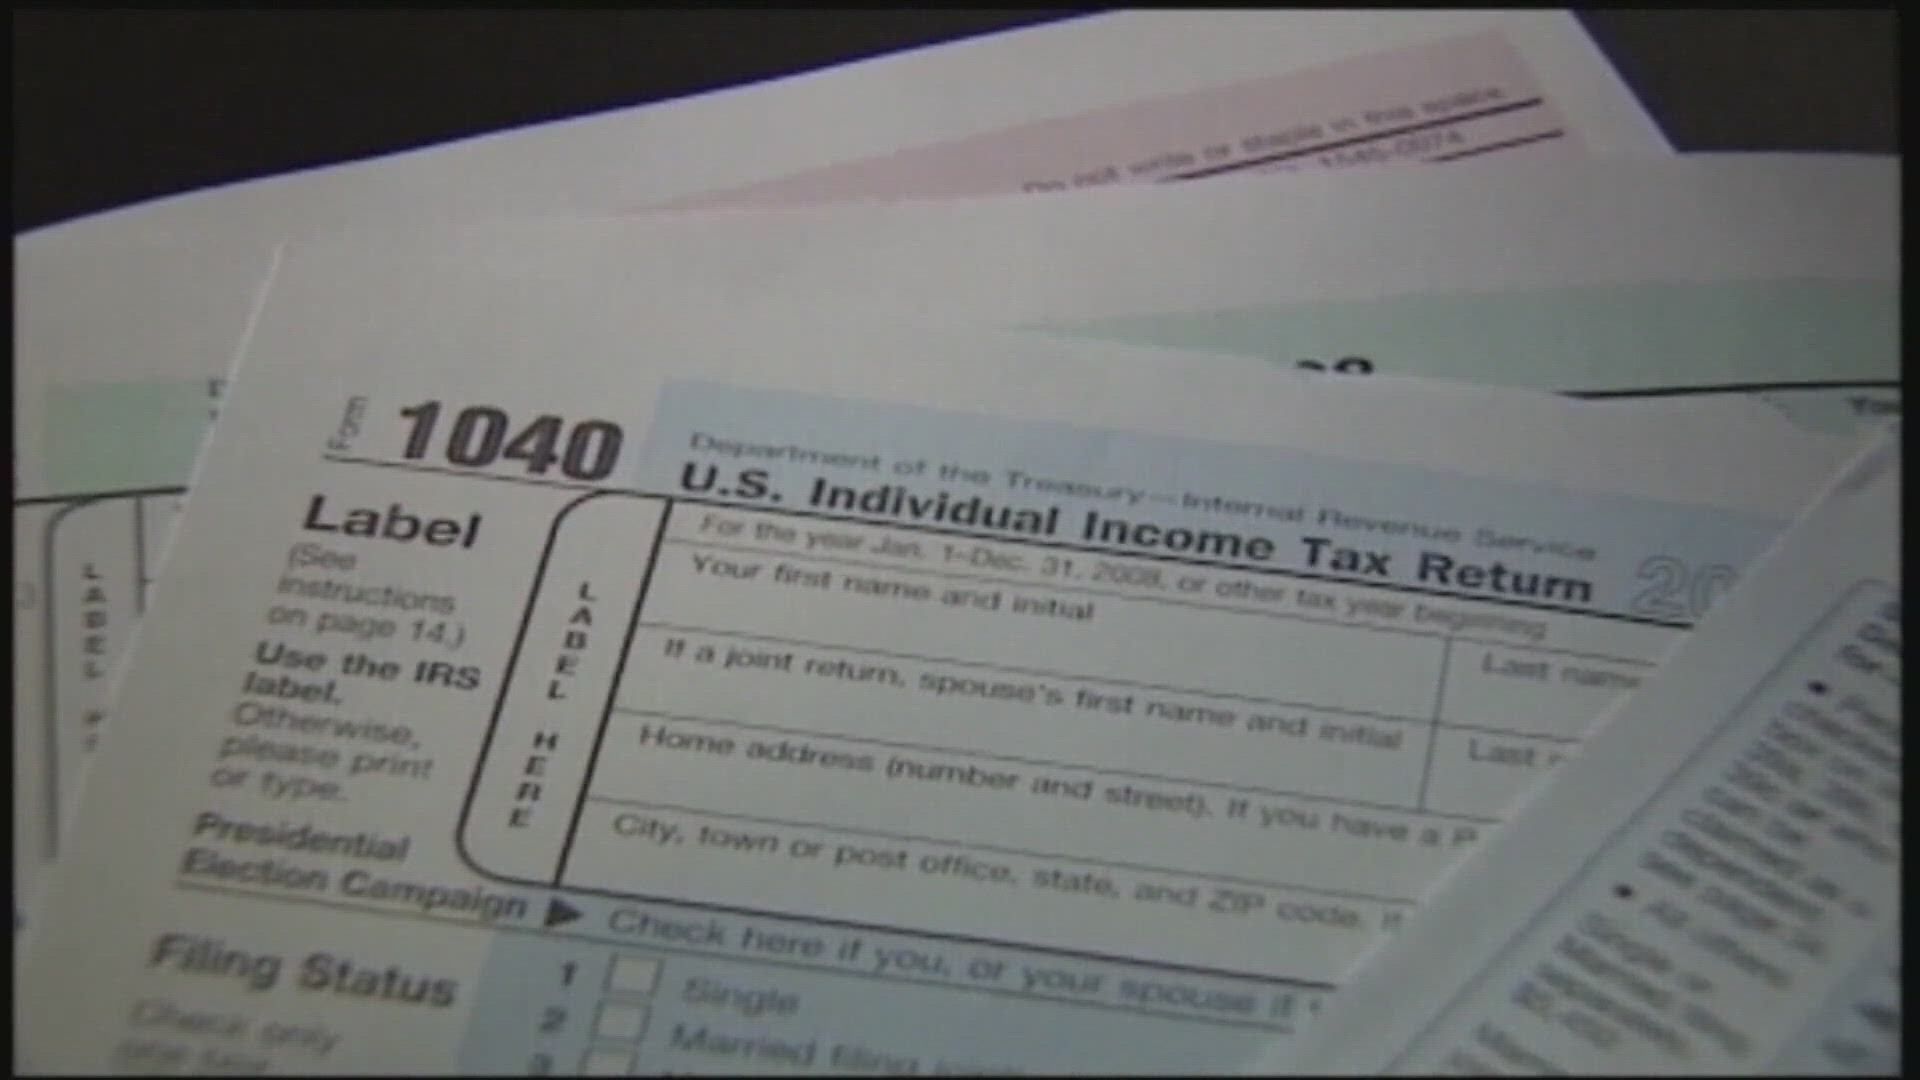 Have you filed your taxes yet?